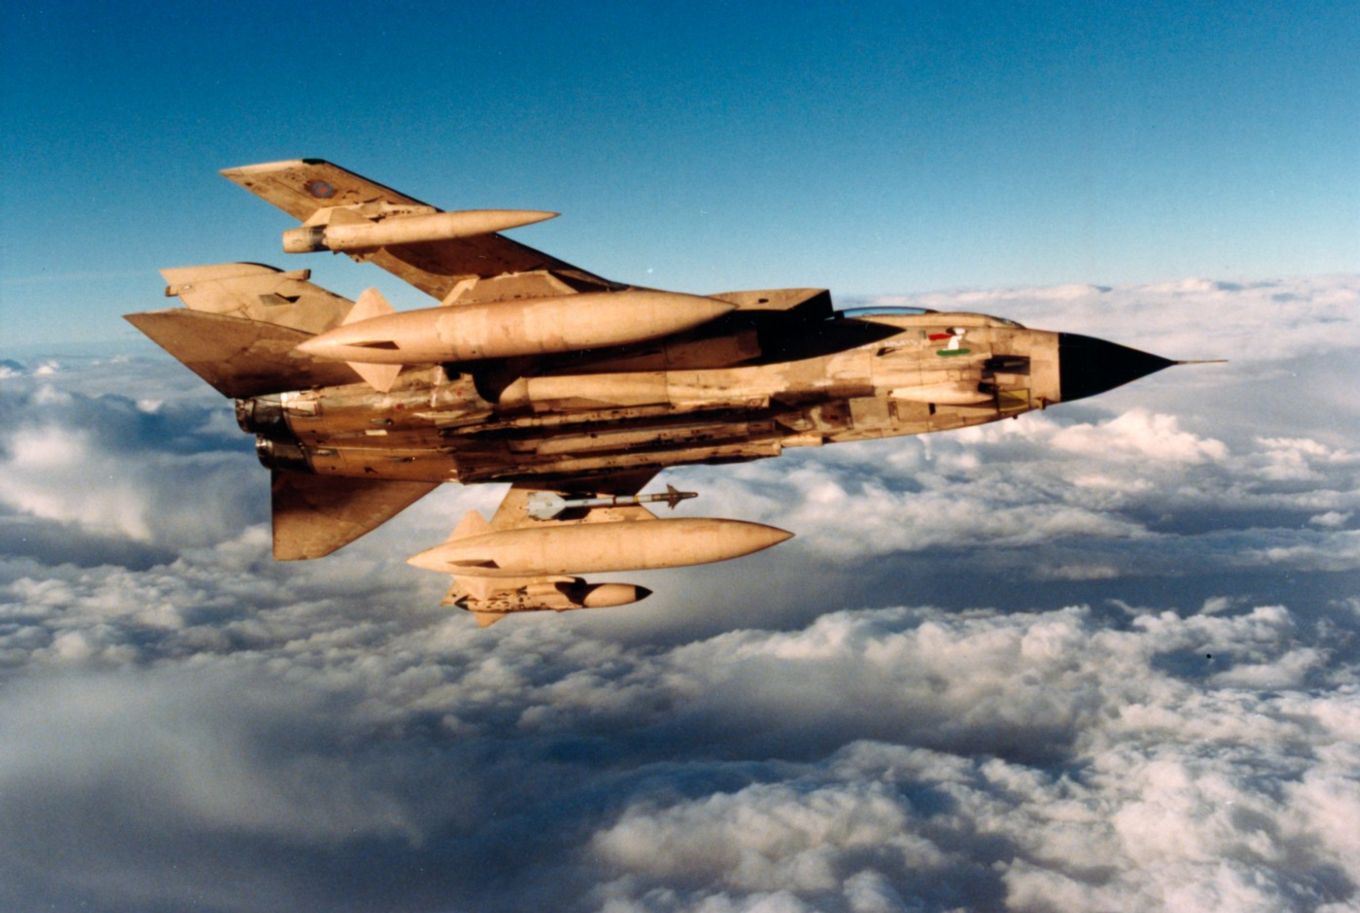 Image shows an RAF Tornado aircraft flying above the clouds.